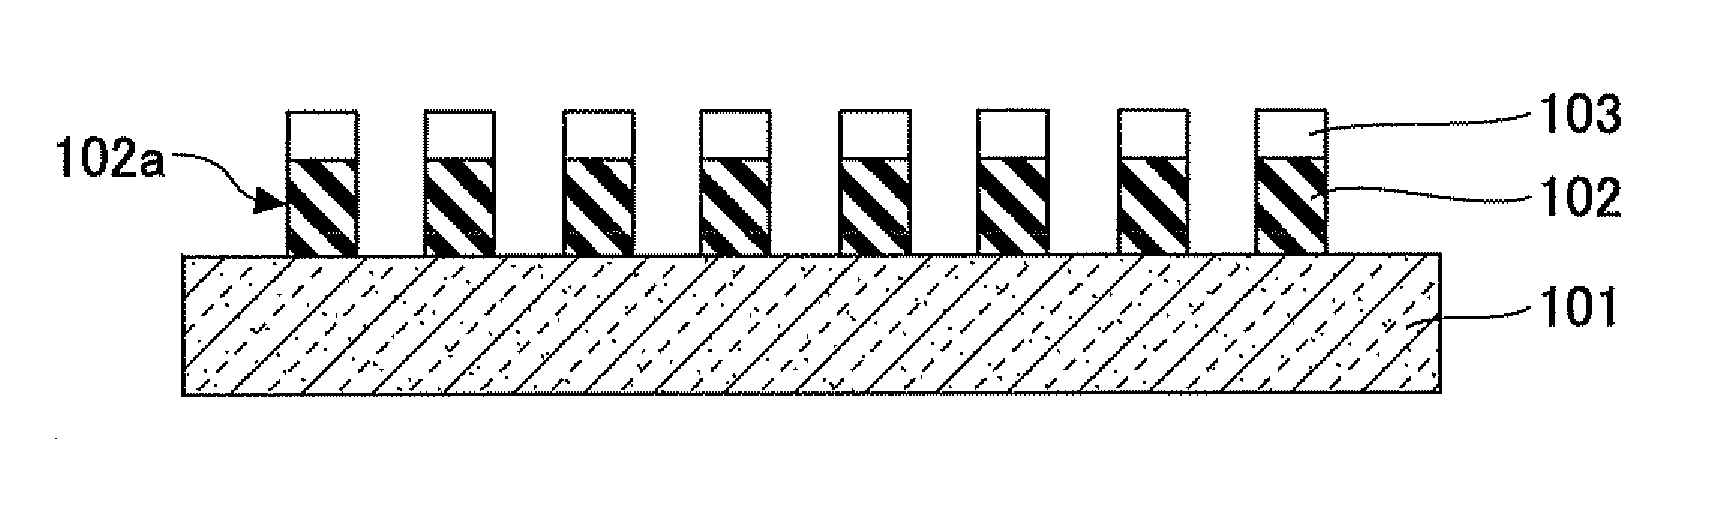 Mask pattern forming method, fine pattern forming method, and film deposition apparatus